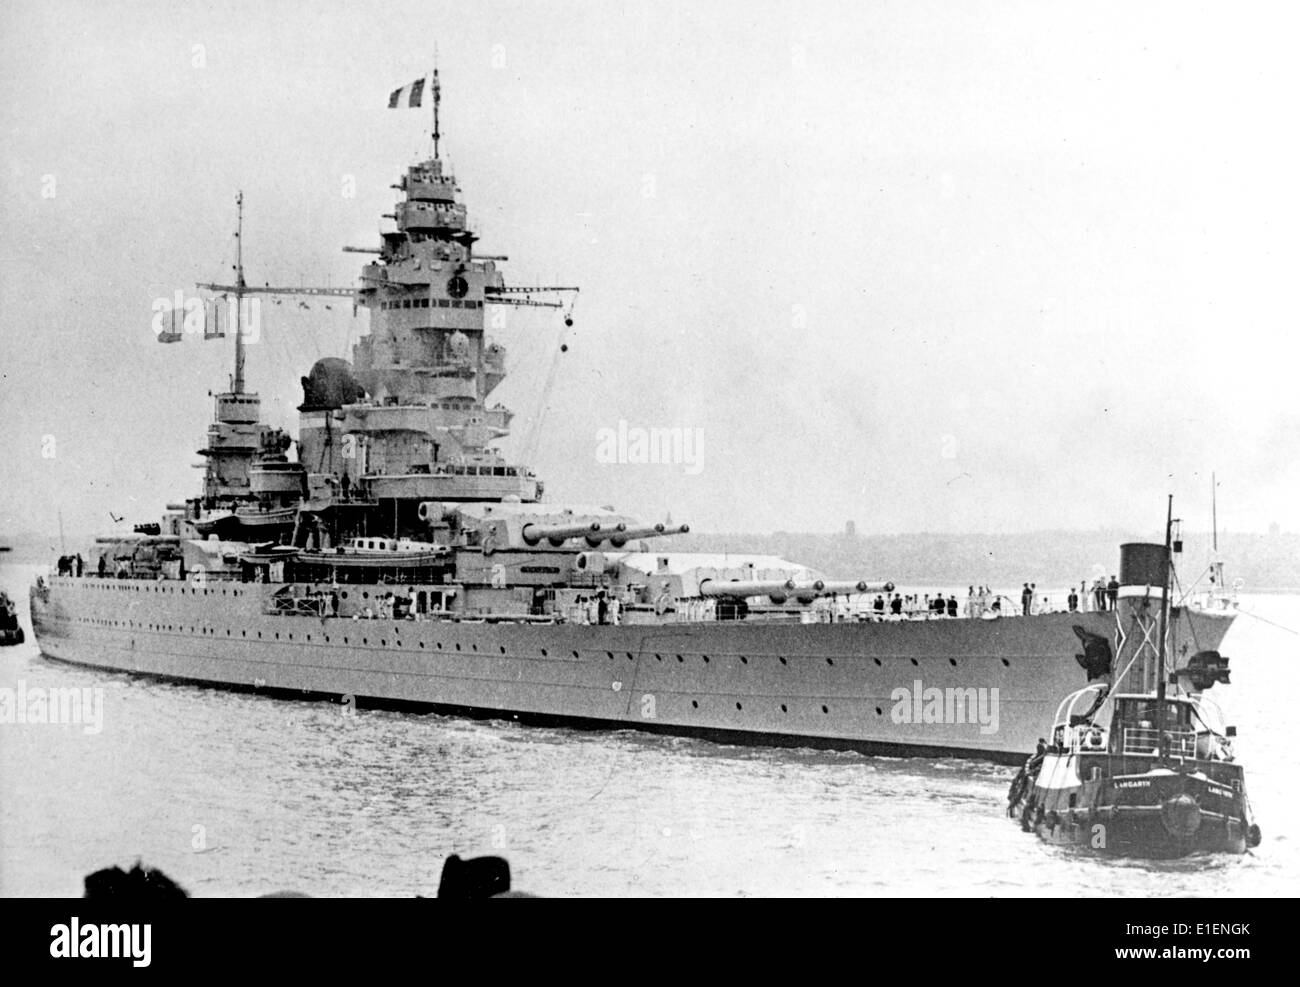 The Nazi propaganda picture shows the French warship Dunkerque armed with a main battery of eight 330mm guns arranged in two quadruple gun turrets, around 1939. Fotoarchiv für Zeitgeschichtee - NO WIRE SERVICE Stock Photo